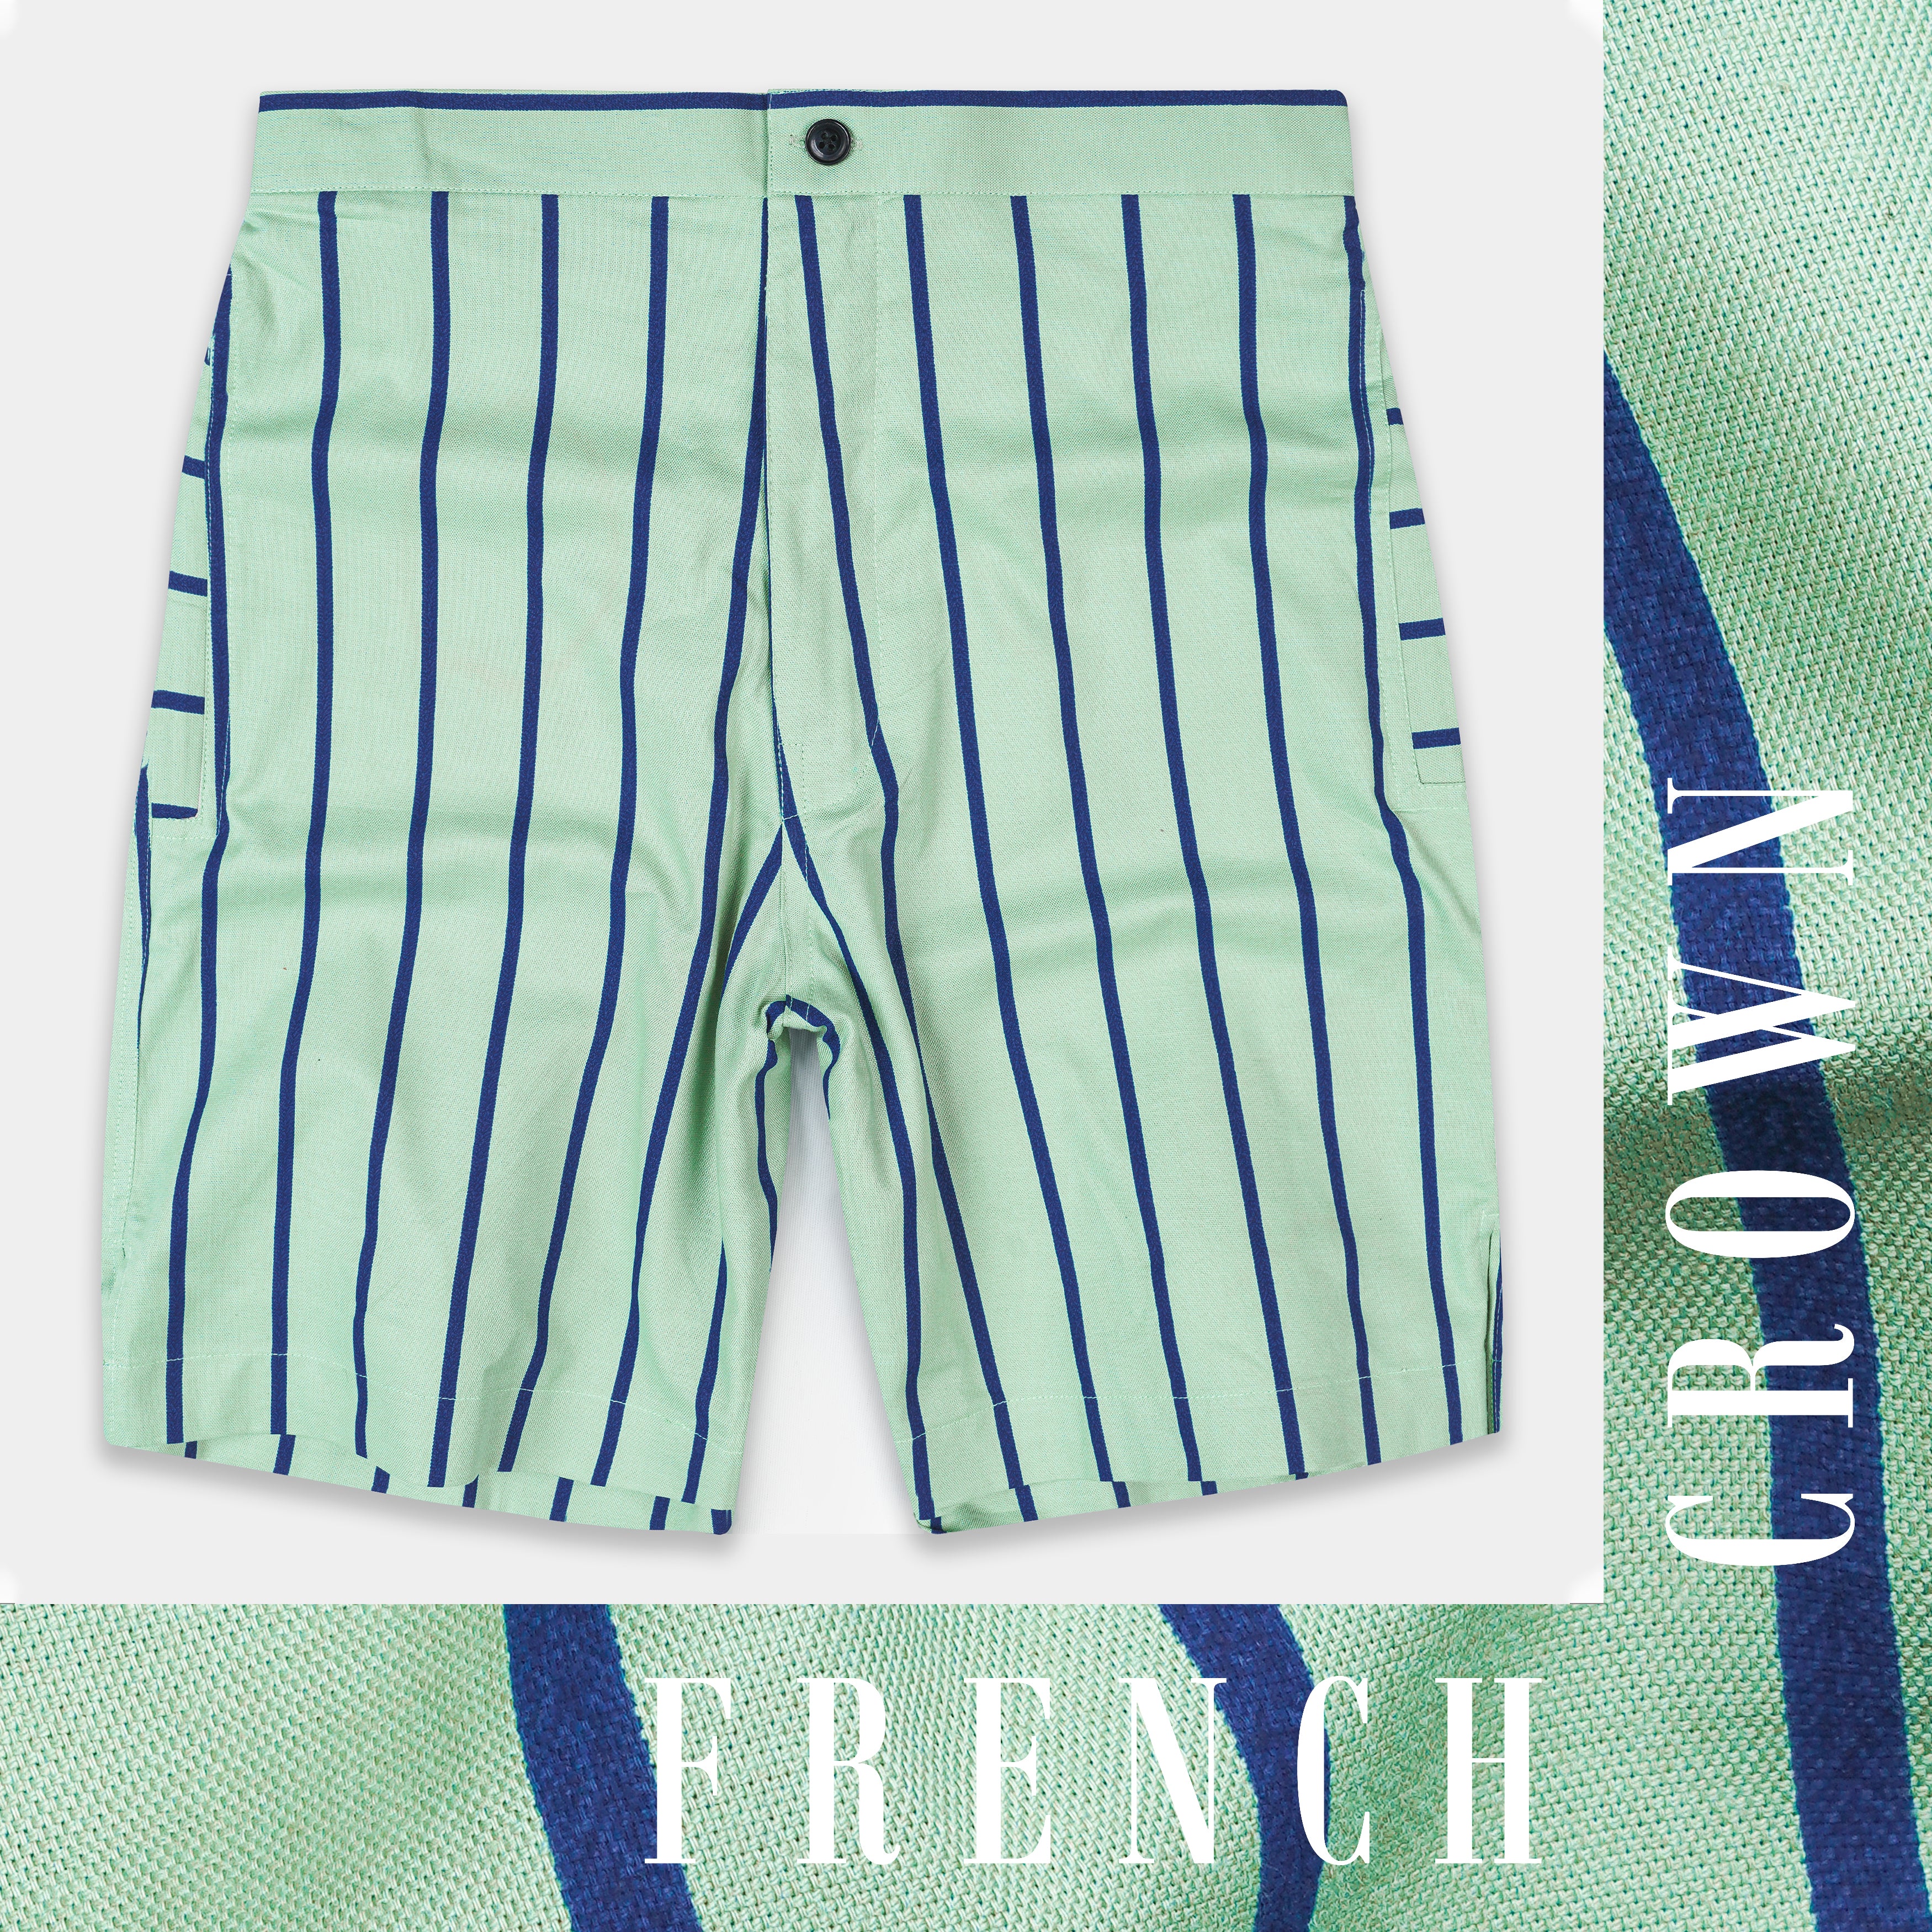 Surf Green with Cobalt Blue Striped Oxford Shorts SR350-28,  SR350-30,  SR350-32,  SR350-34,  SR350-36,  SR350-38,  SR350-40,  SR350-42,  SR350-44